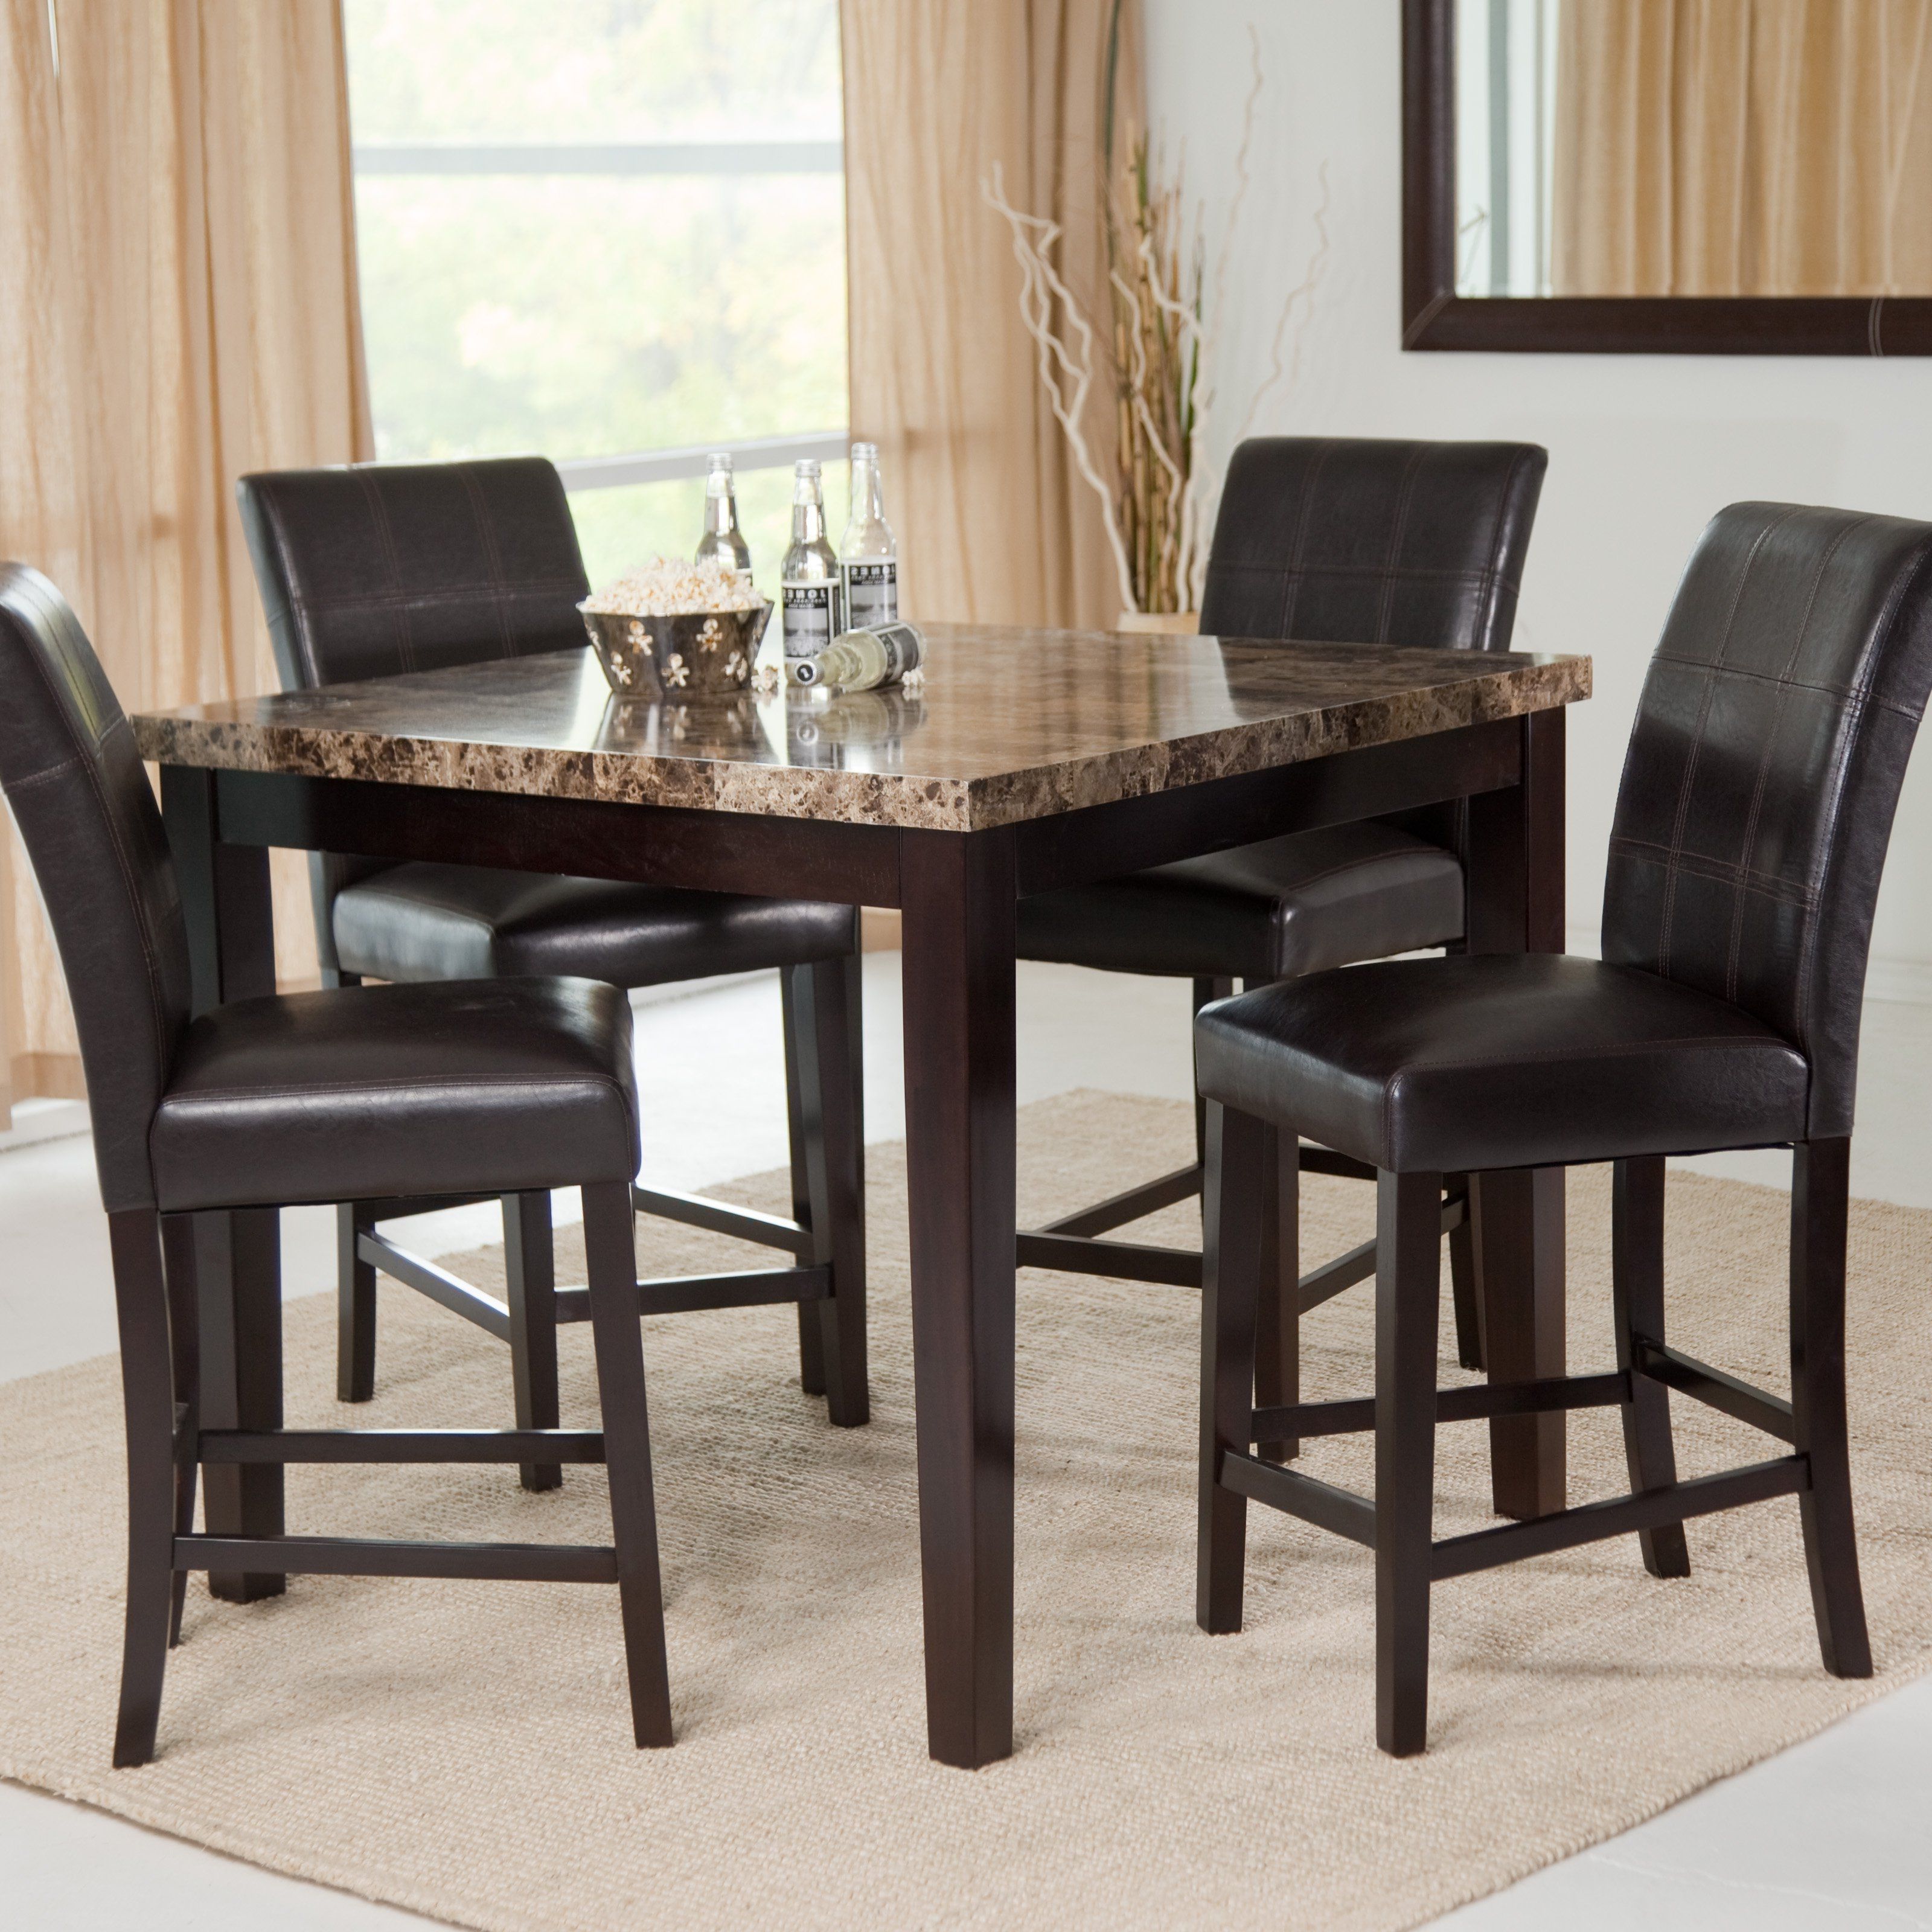 Palazzo 6 Piece Rectangle Dining Sets With Joss Side Chairs For Well Liked Have To Have It. Palazzo 5 Piece Counter Height Dining Set – $449.98 (Photo 13 of 25)